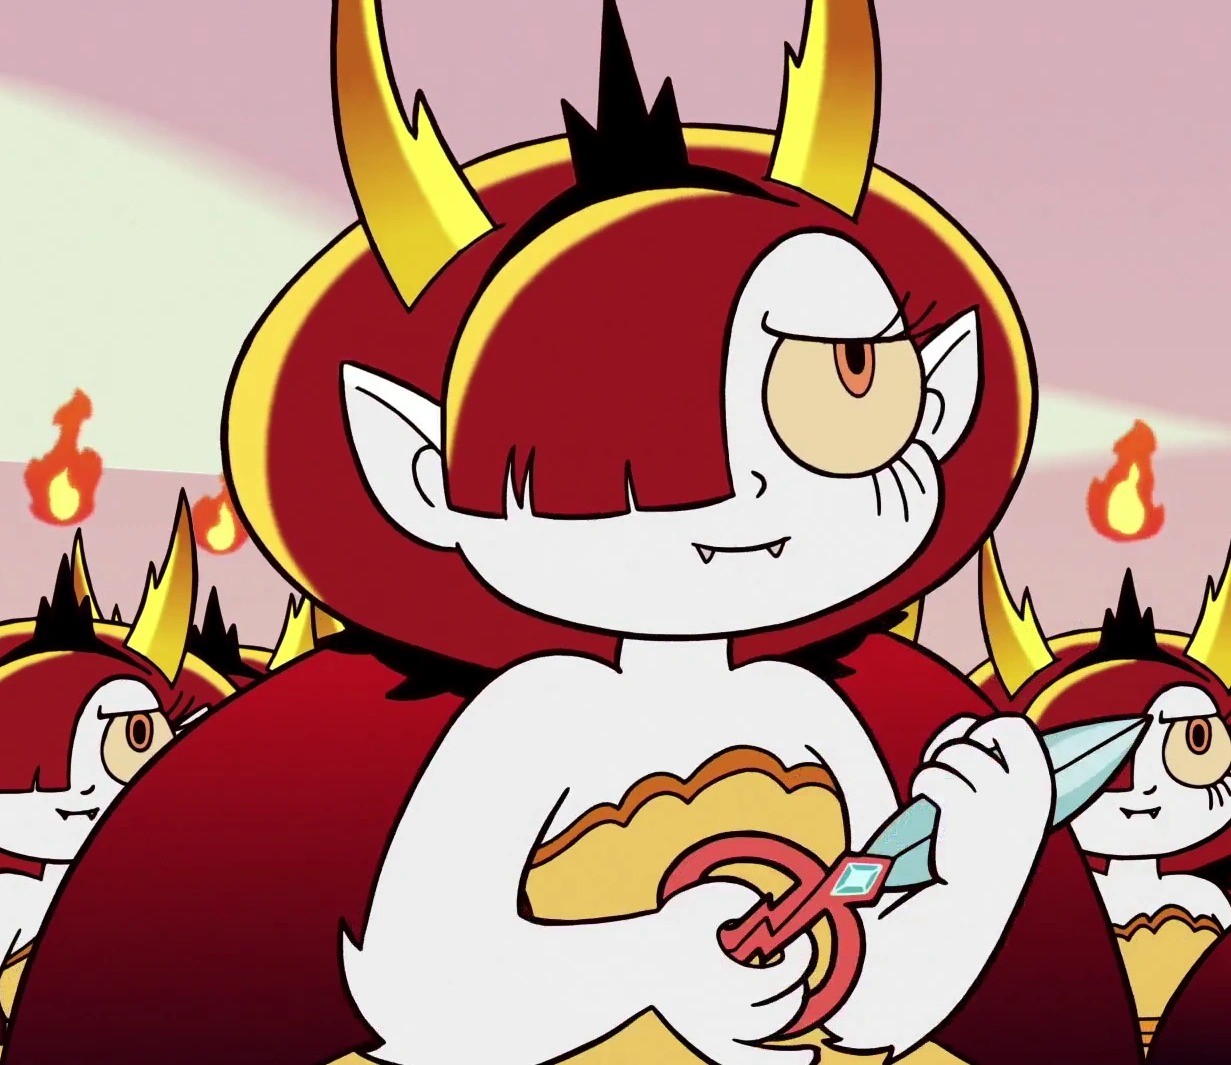 24-facts-about-hekapoo-star-vs-the-forces-of-evil